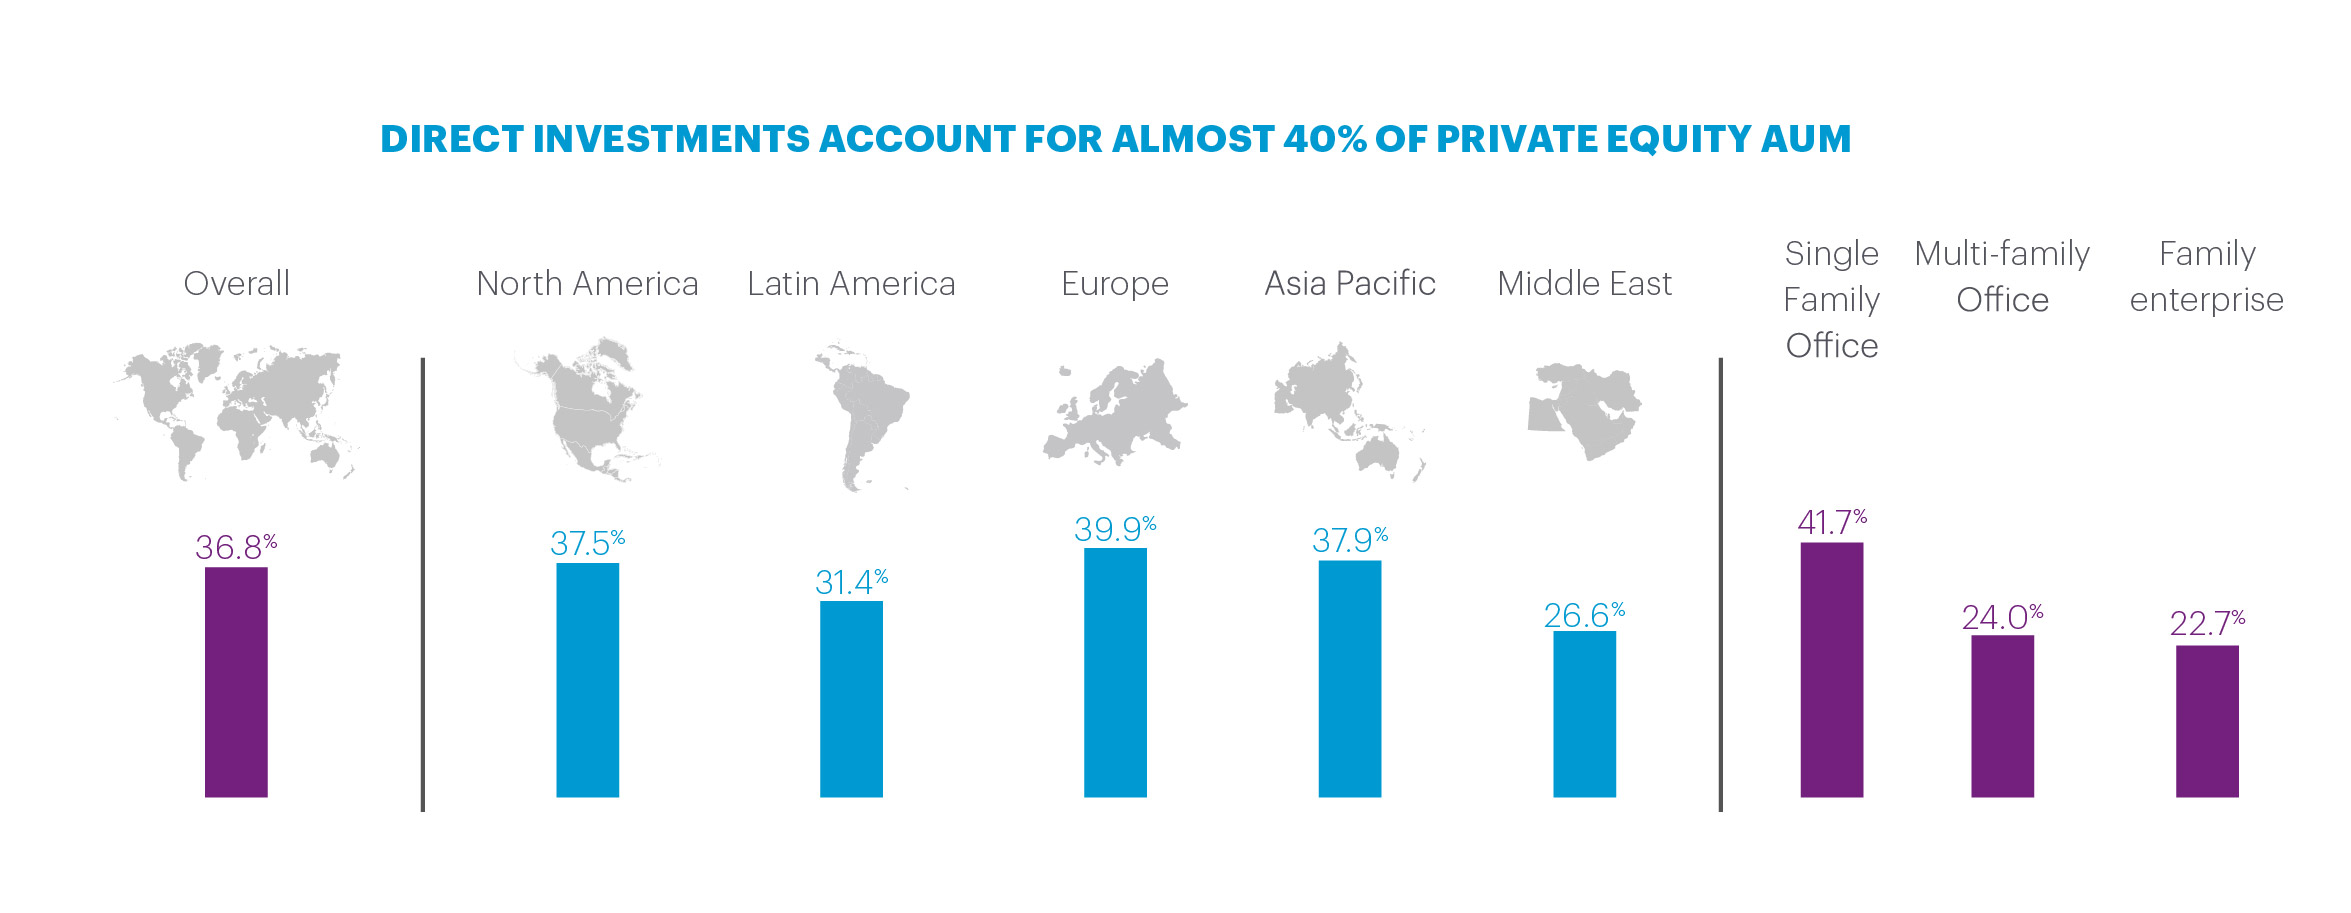 Regional percentages of direct investments accounting for private equity AUM